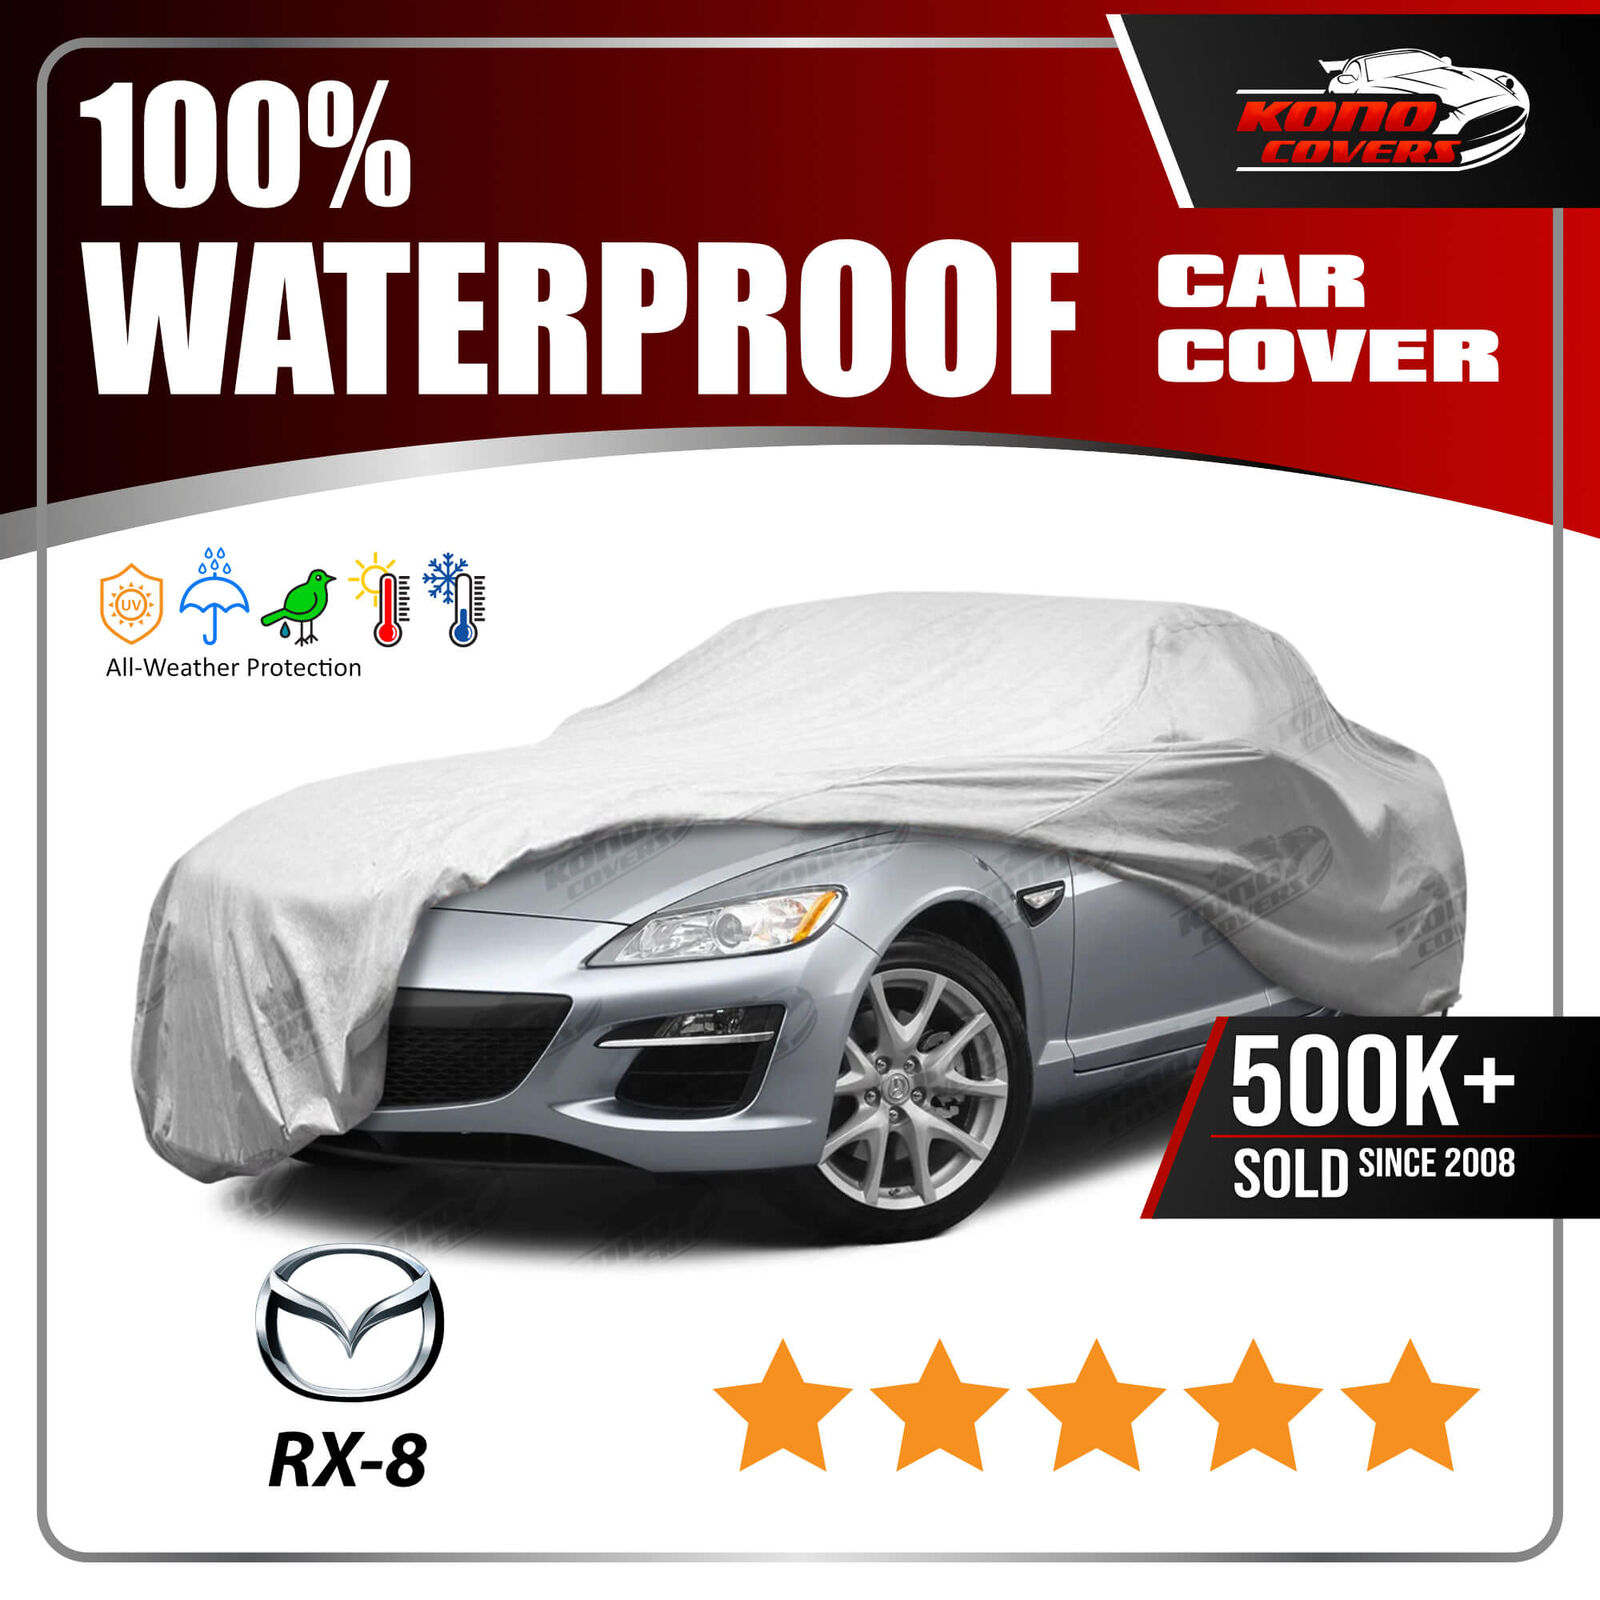 MAZDA RX-8 2004-2011 CAR COVER - 100% Waterproof 100% Breathable